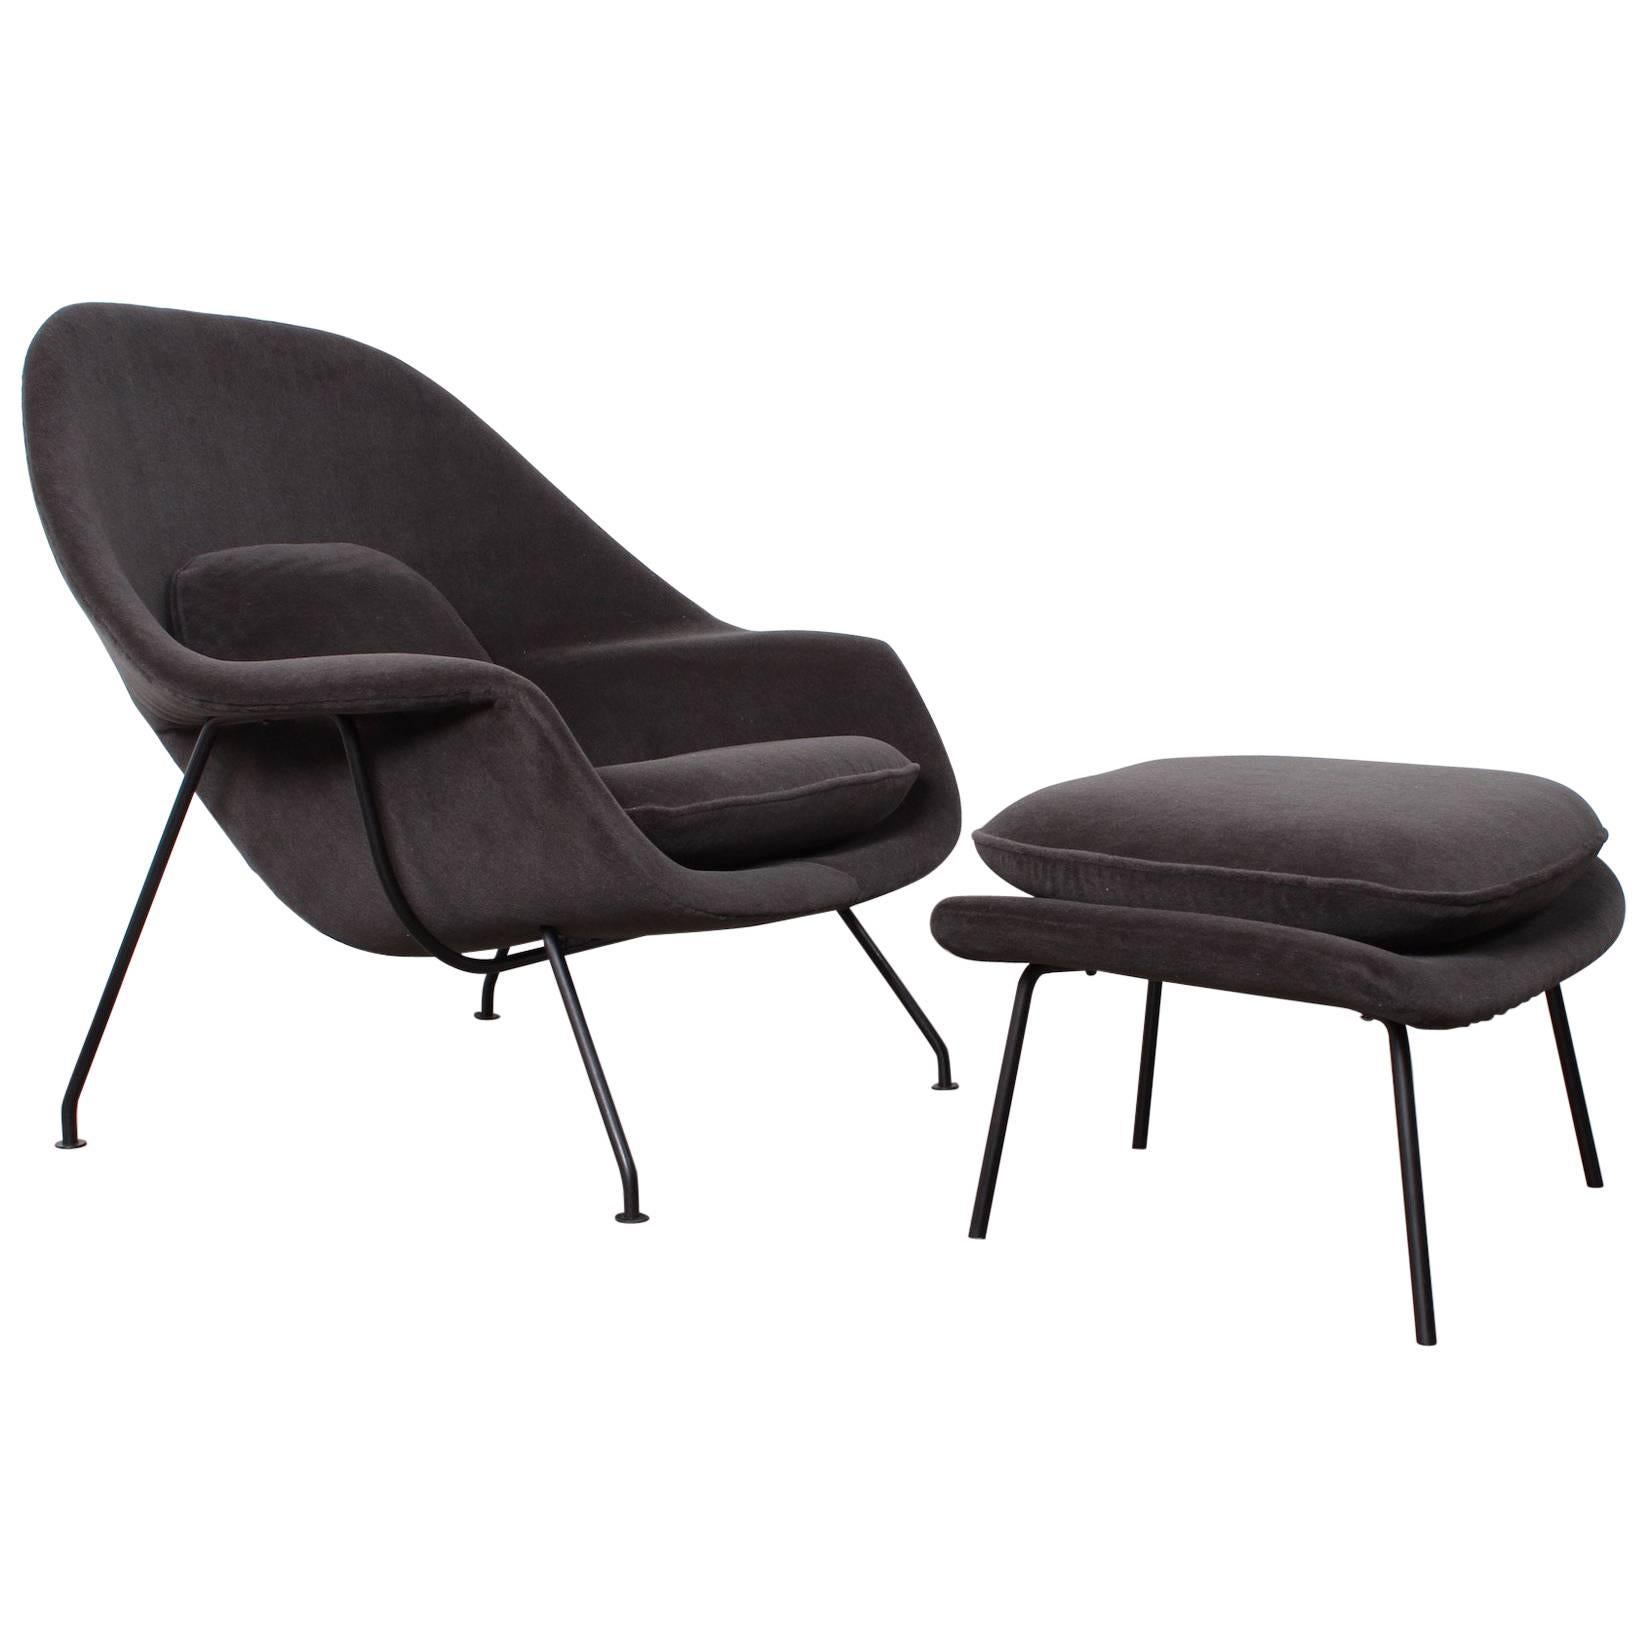 Early Womb Chair and Ottoman by Eero Saarinen for Knoll